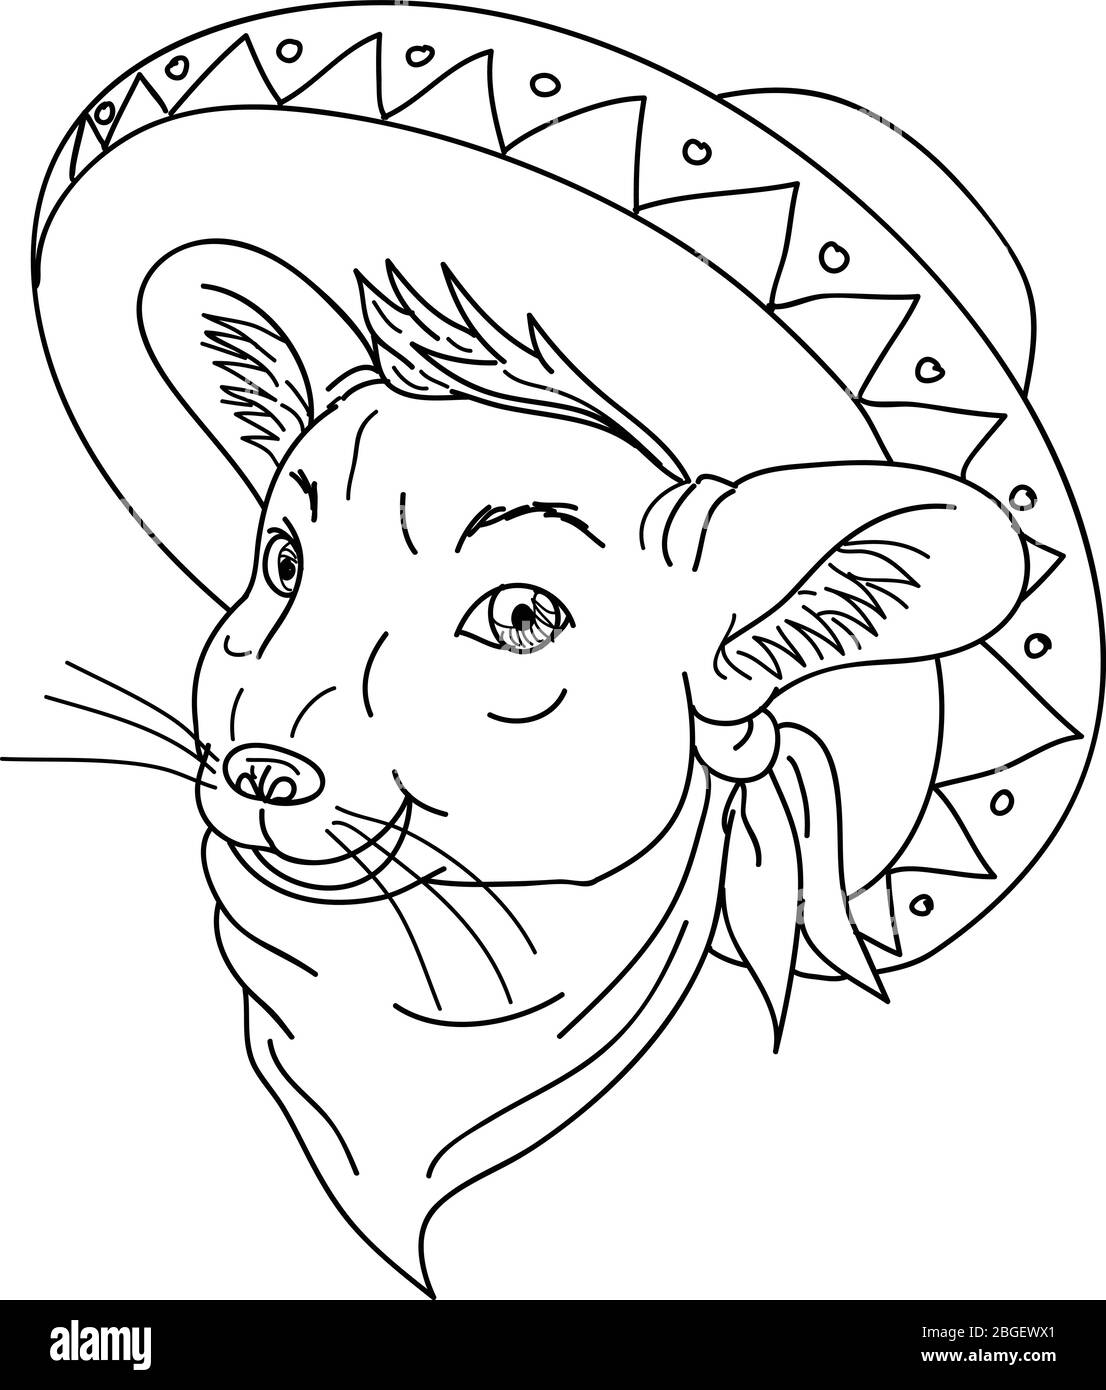 Cartoon style illustration of a Mexican chinchilla wearing a sombrero and bandana on isolated background done in black and white. Stock Vector